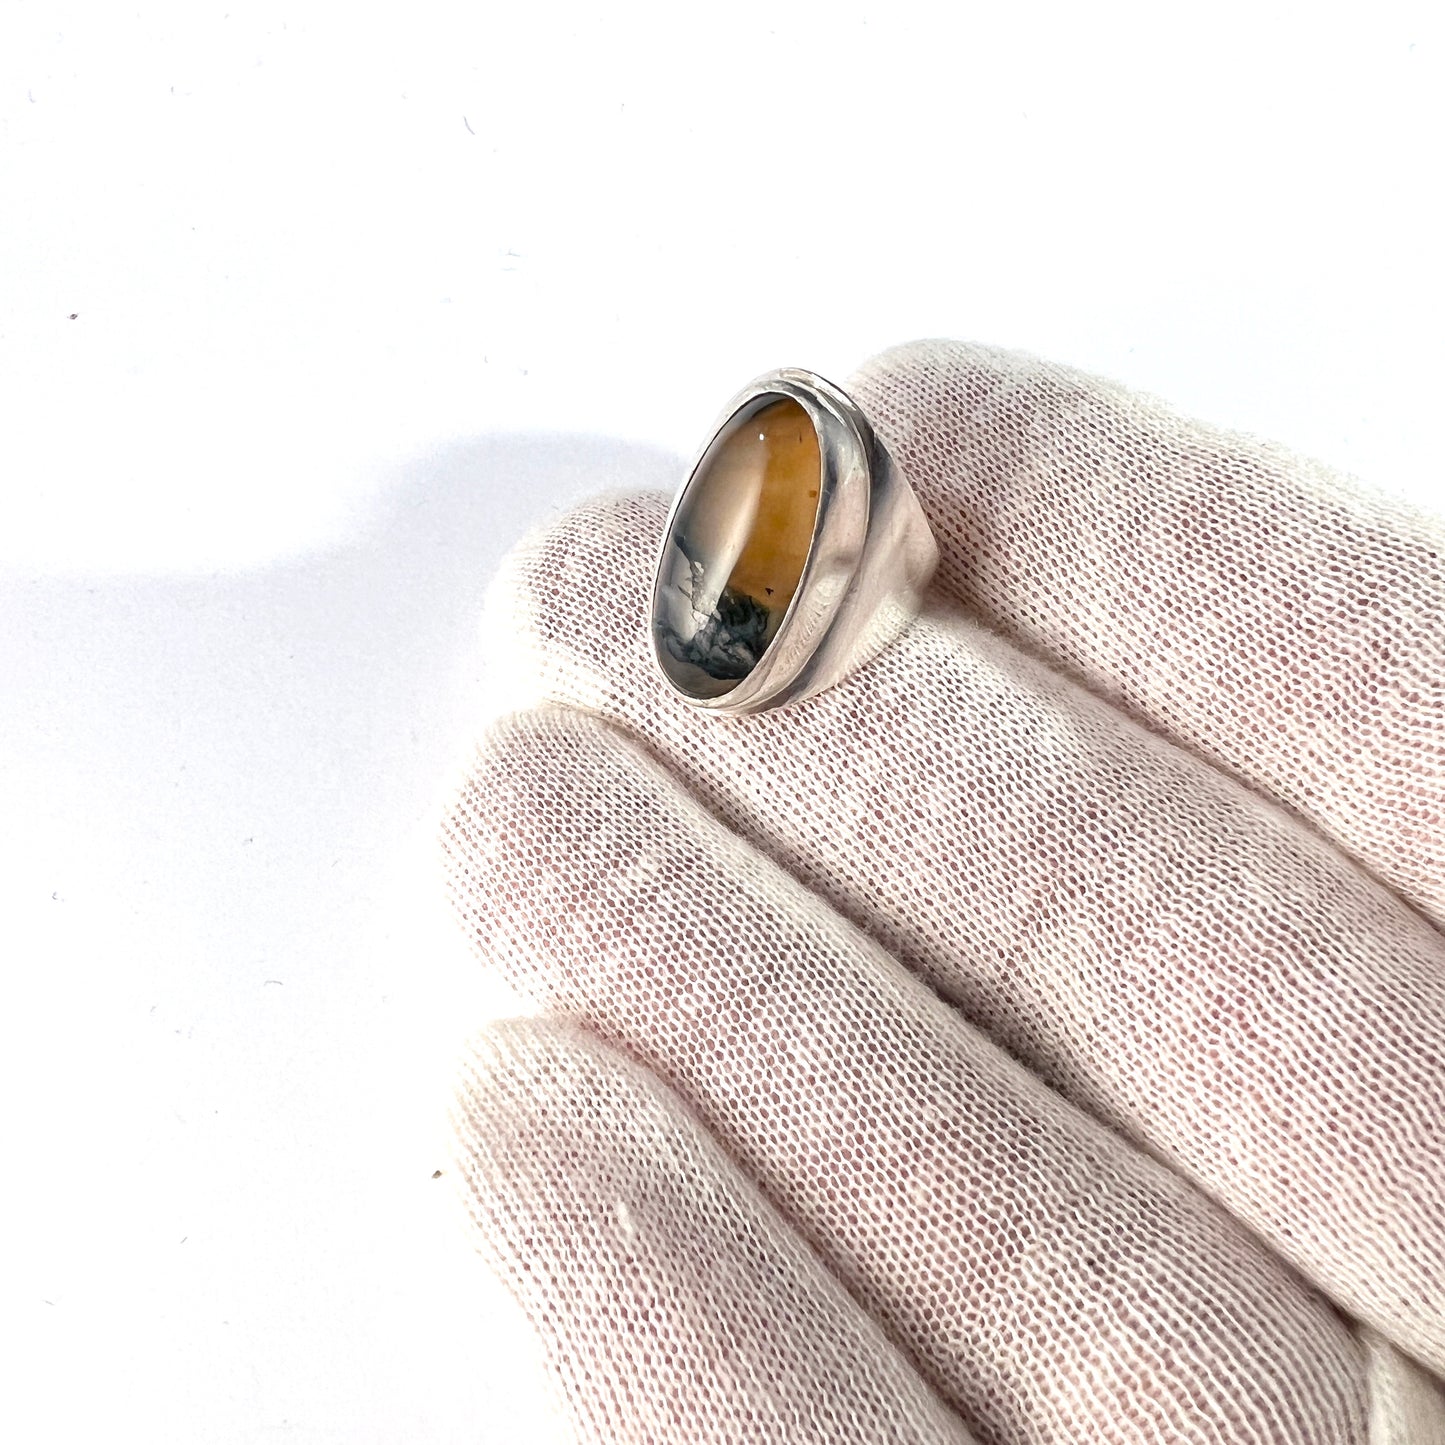 Germany c 1960s. Vintage 835 Silver Moss Agate Ring.